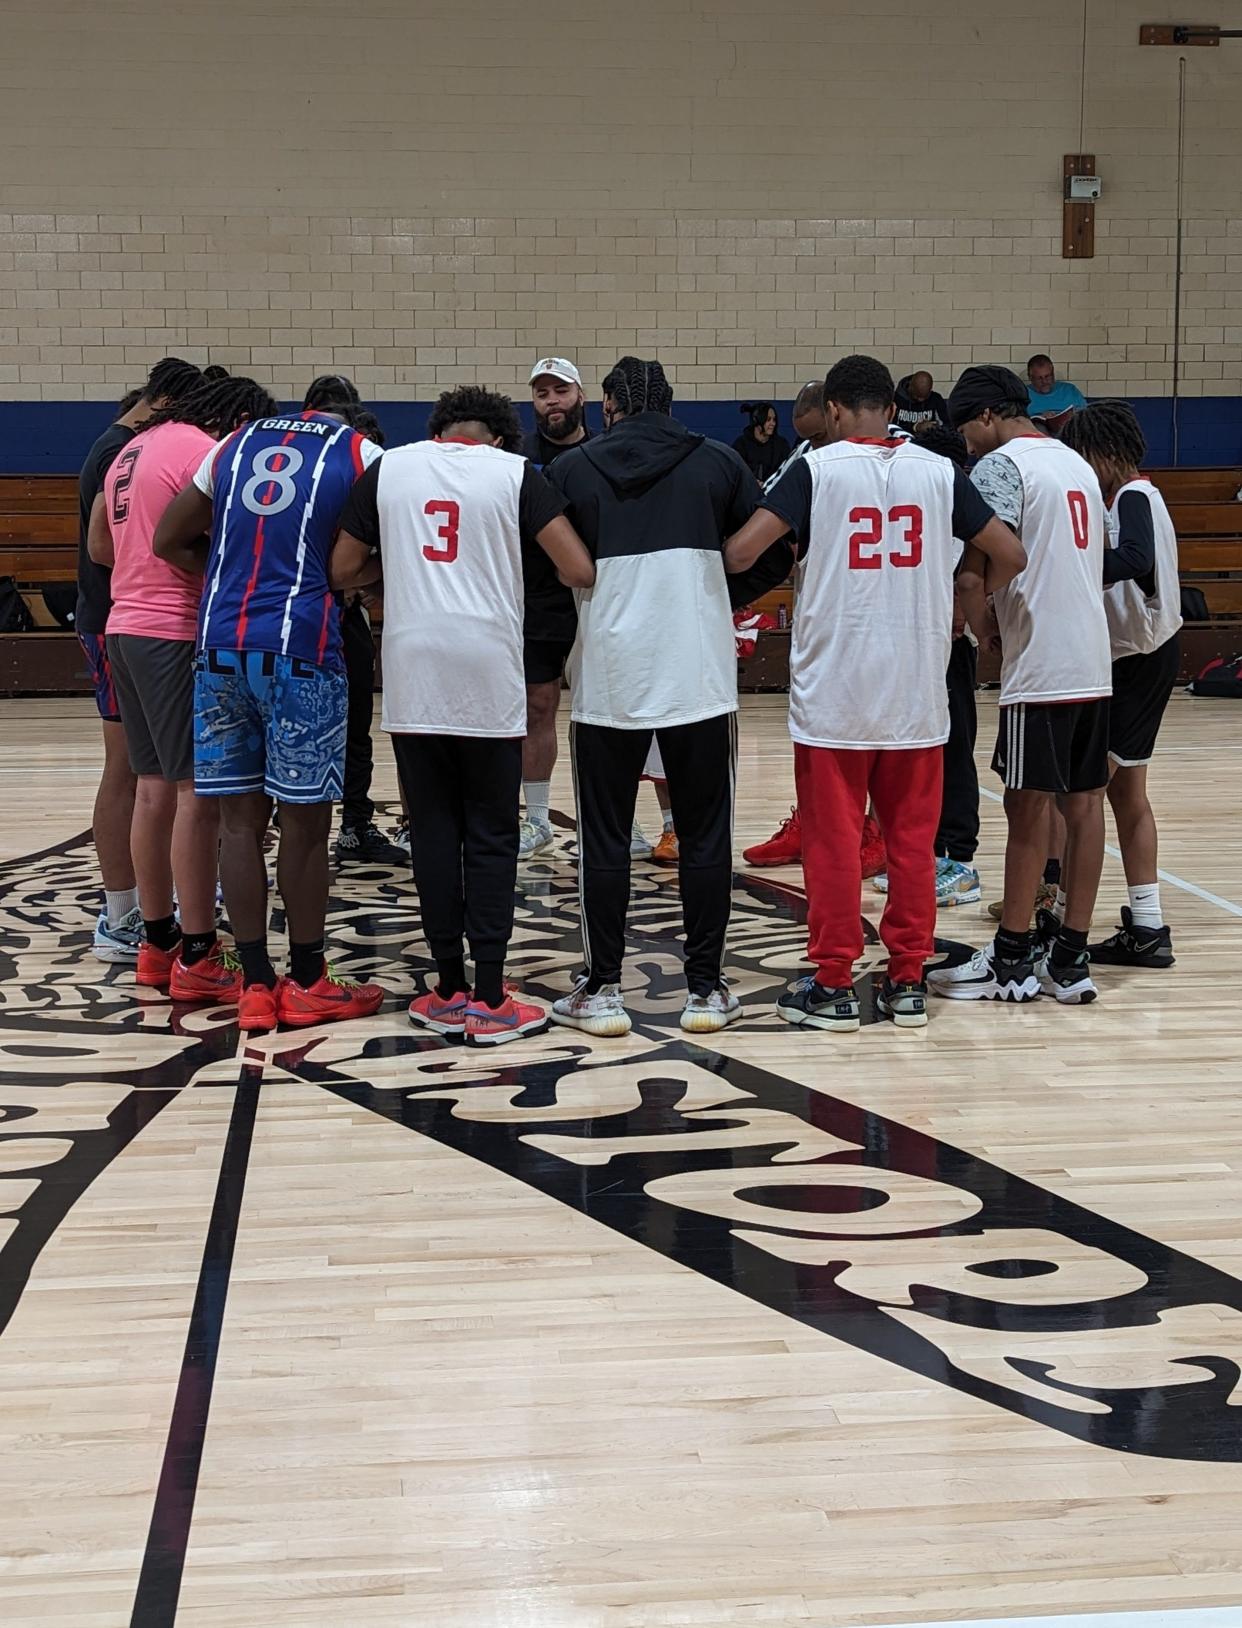 Nate Chester (center), executive director of the Martin Center in Canton leads a prayer prior to a basketball game sponsored by Taking The Crown, a faith-based sports outreach for teen boys.